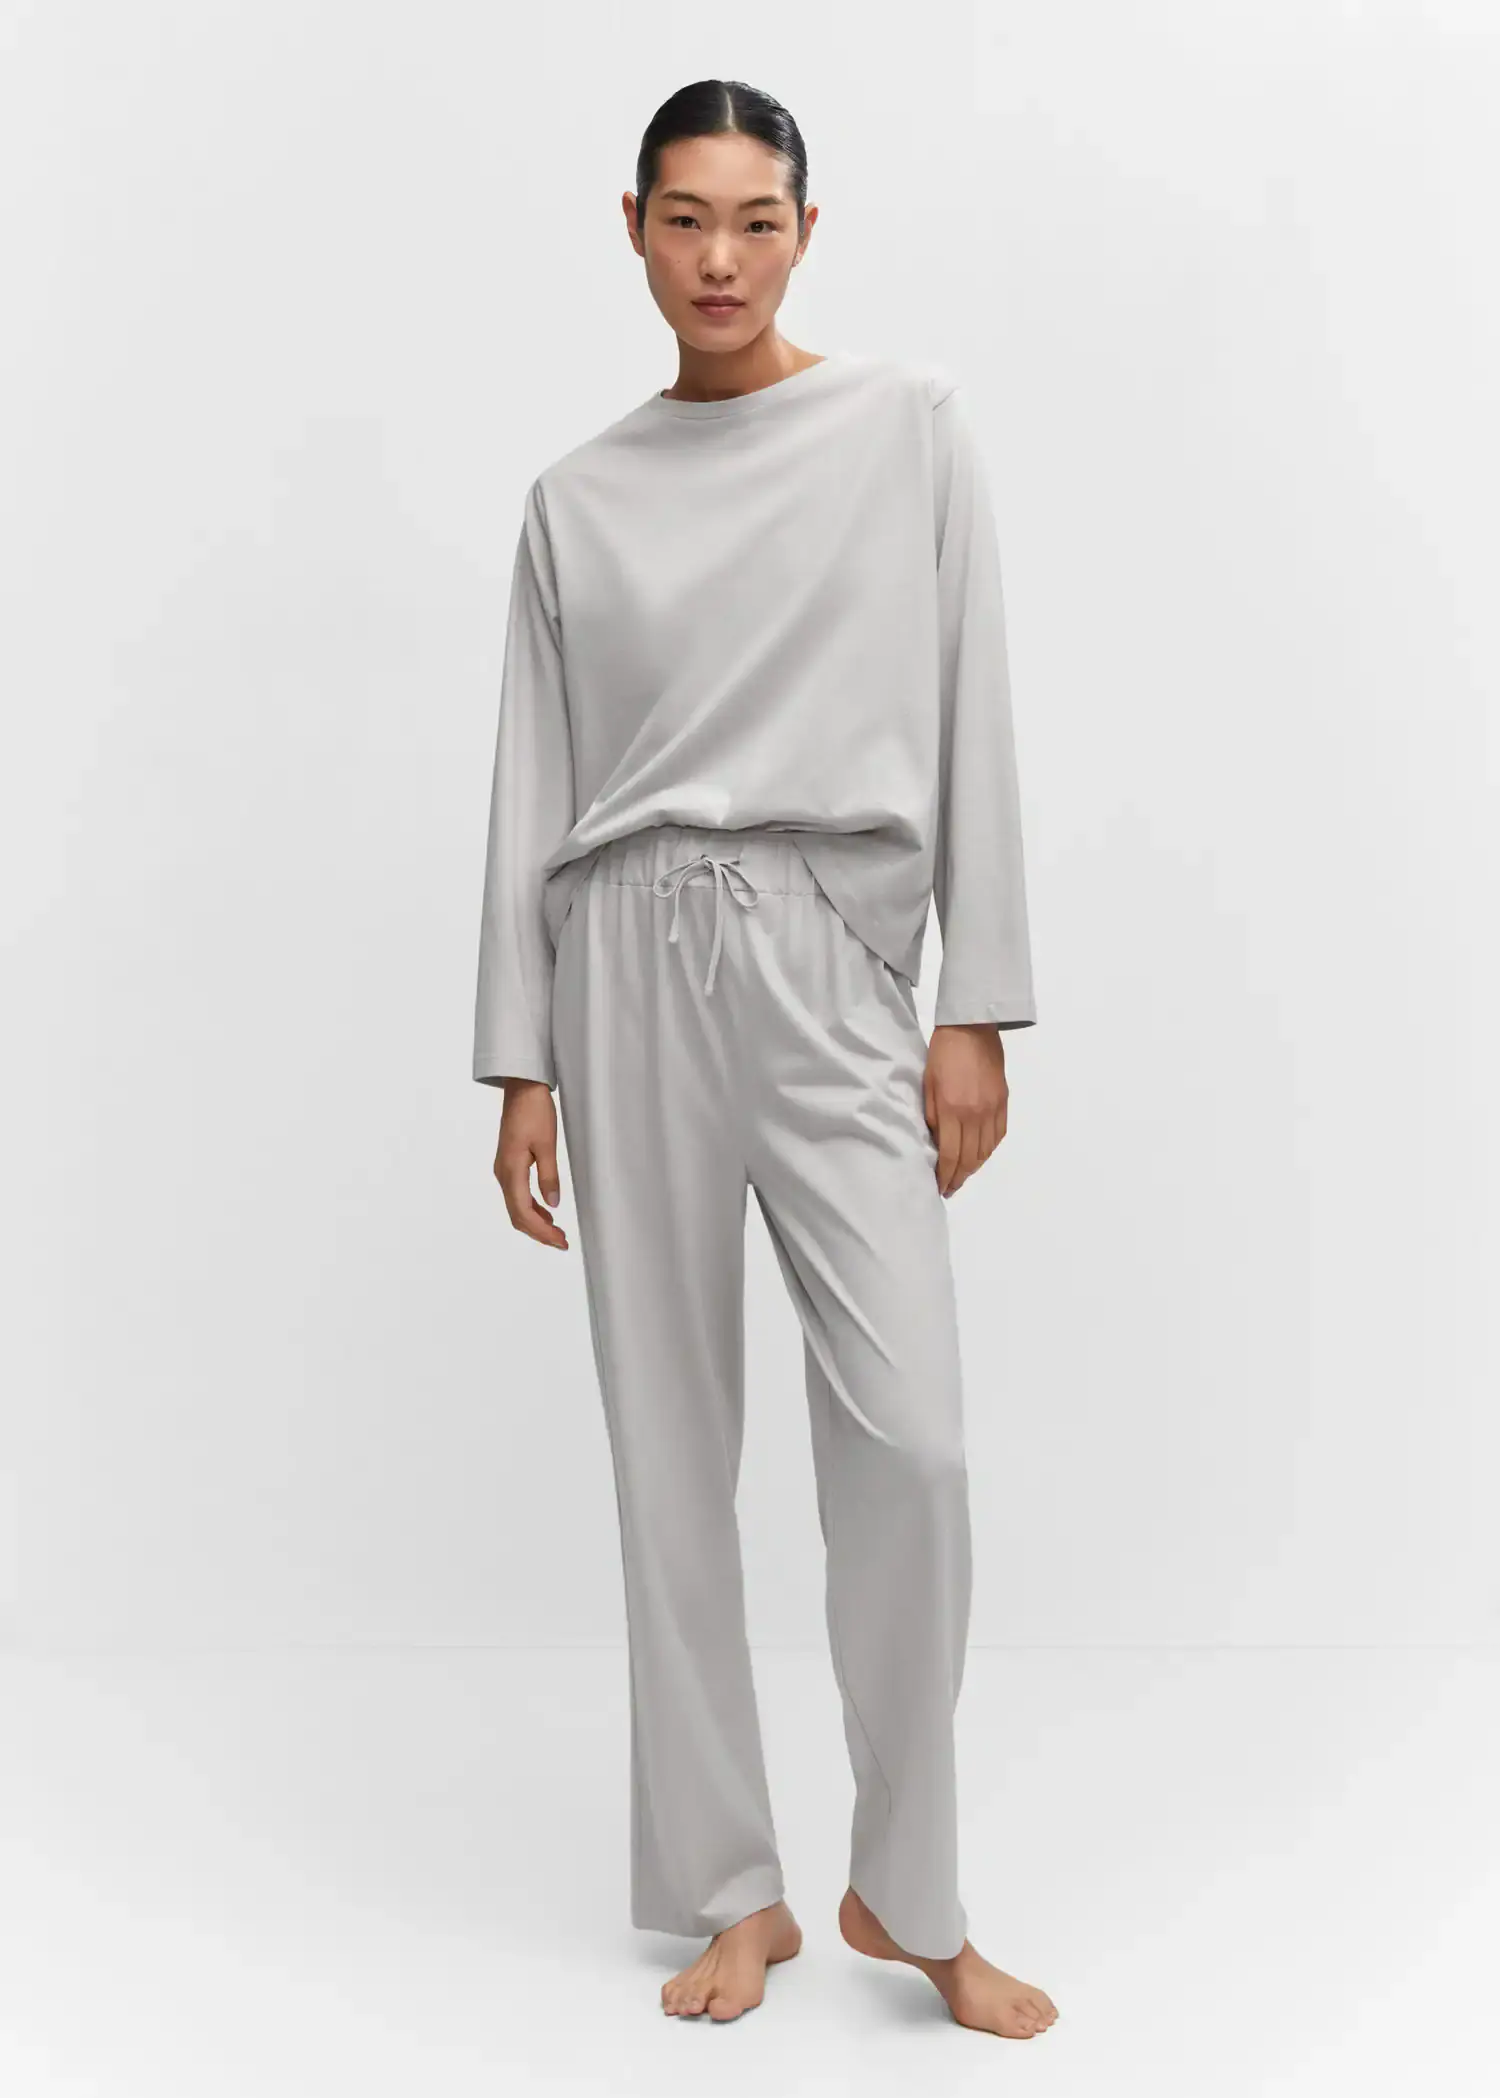 Mango Cotton long pyjamas. a person standing in a room wearing a gray outfit. 